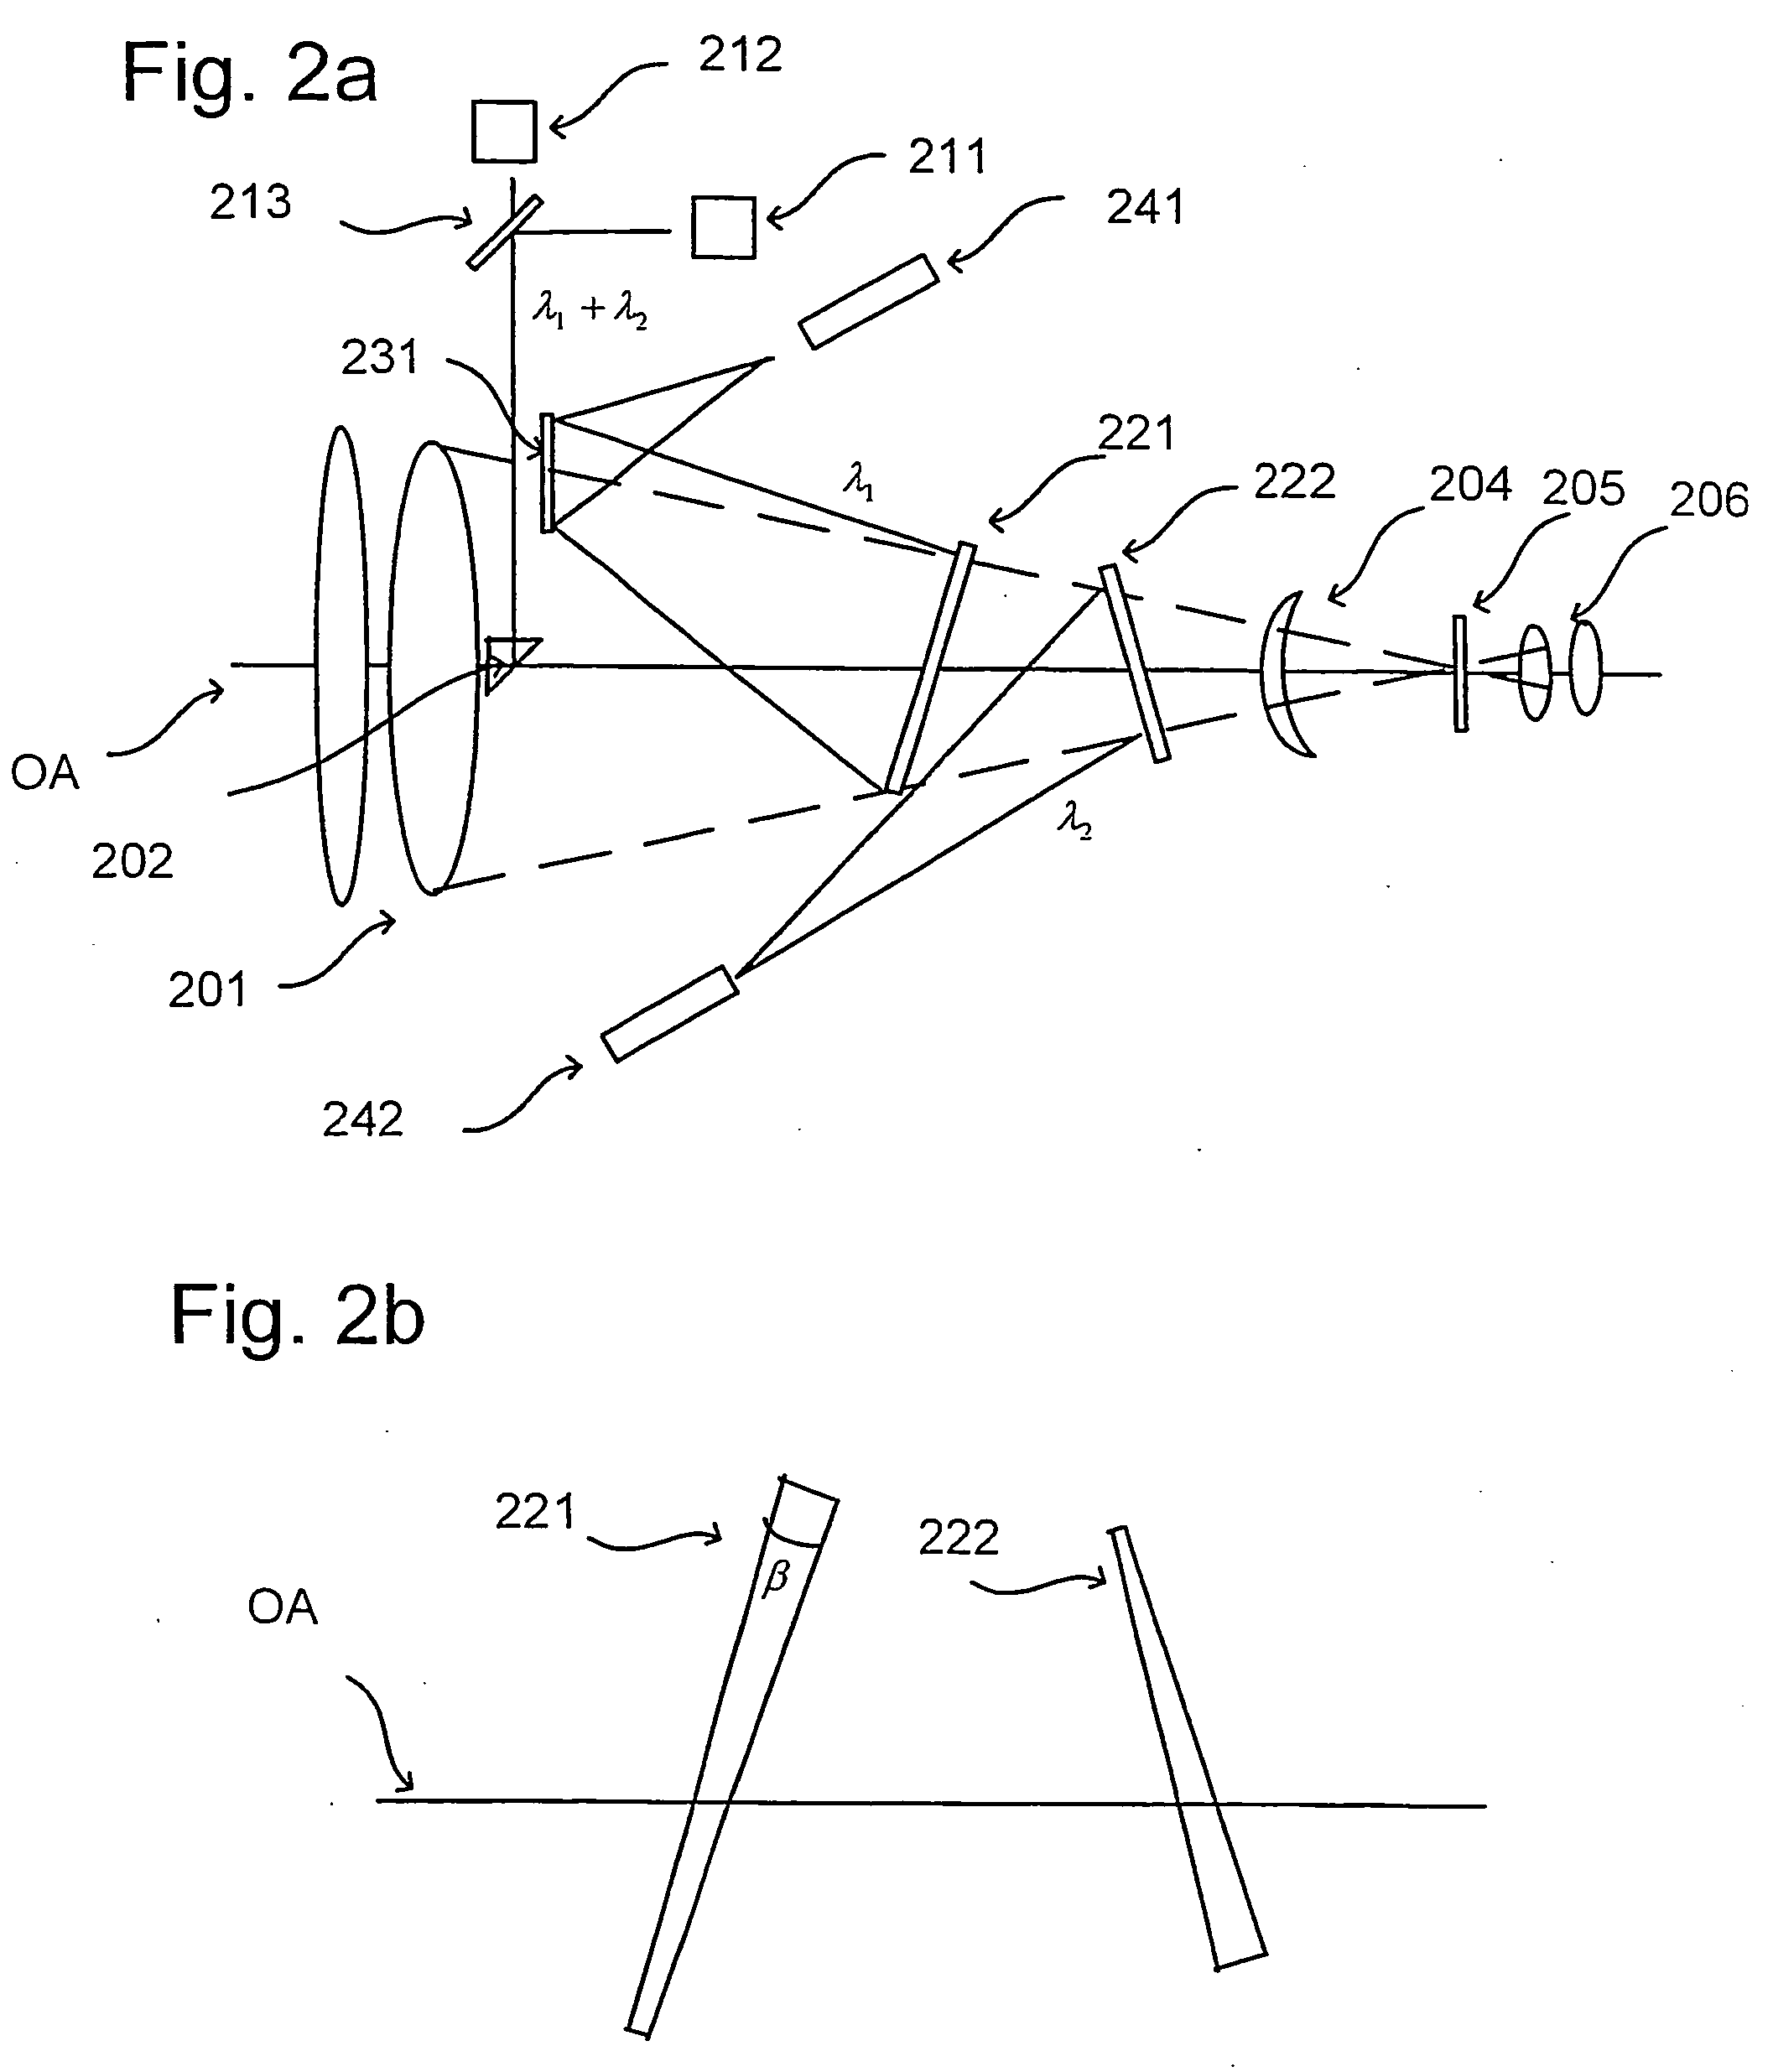 Multiple optical channels